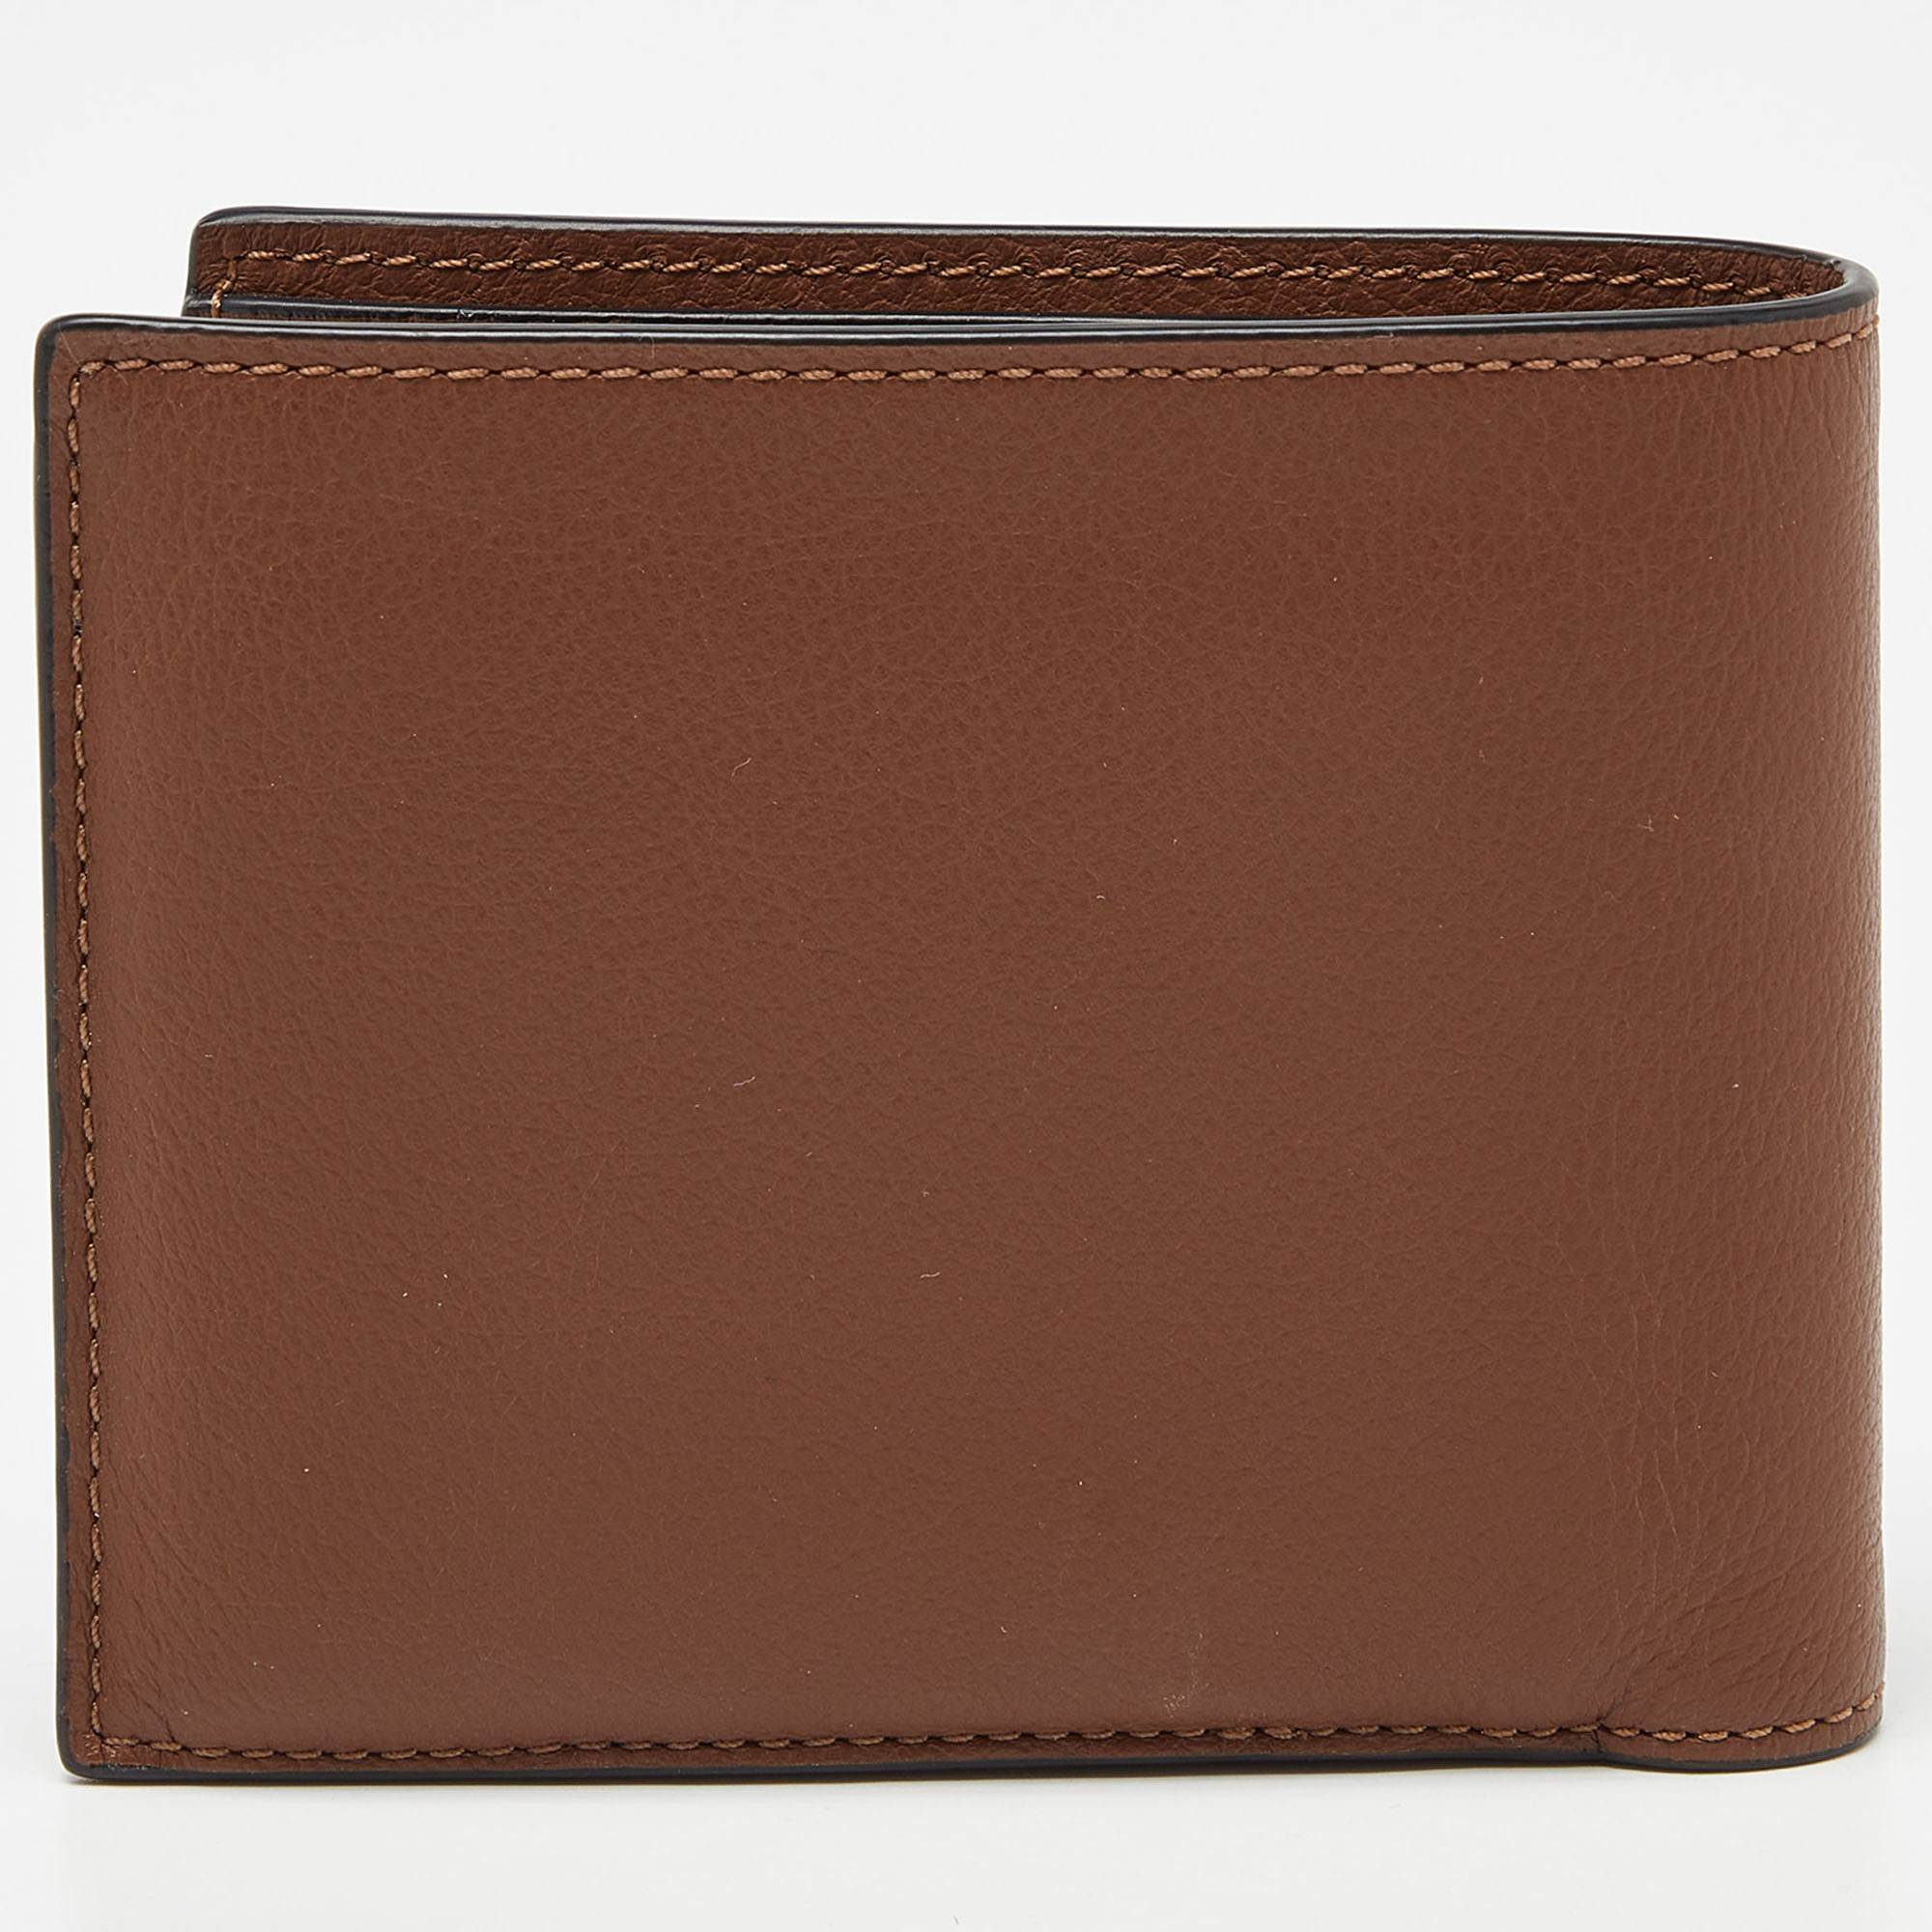 Coach Brown Leather Bifold Wallet